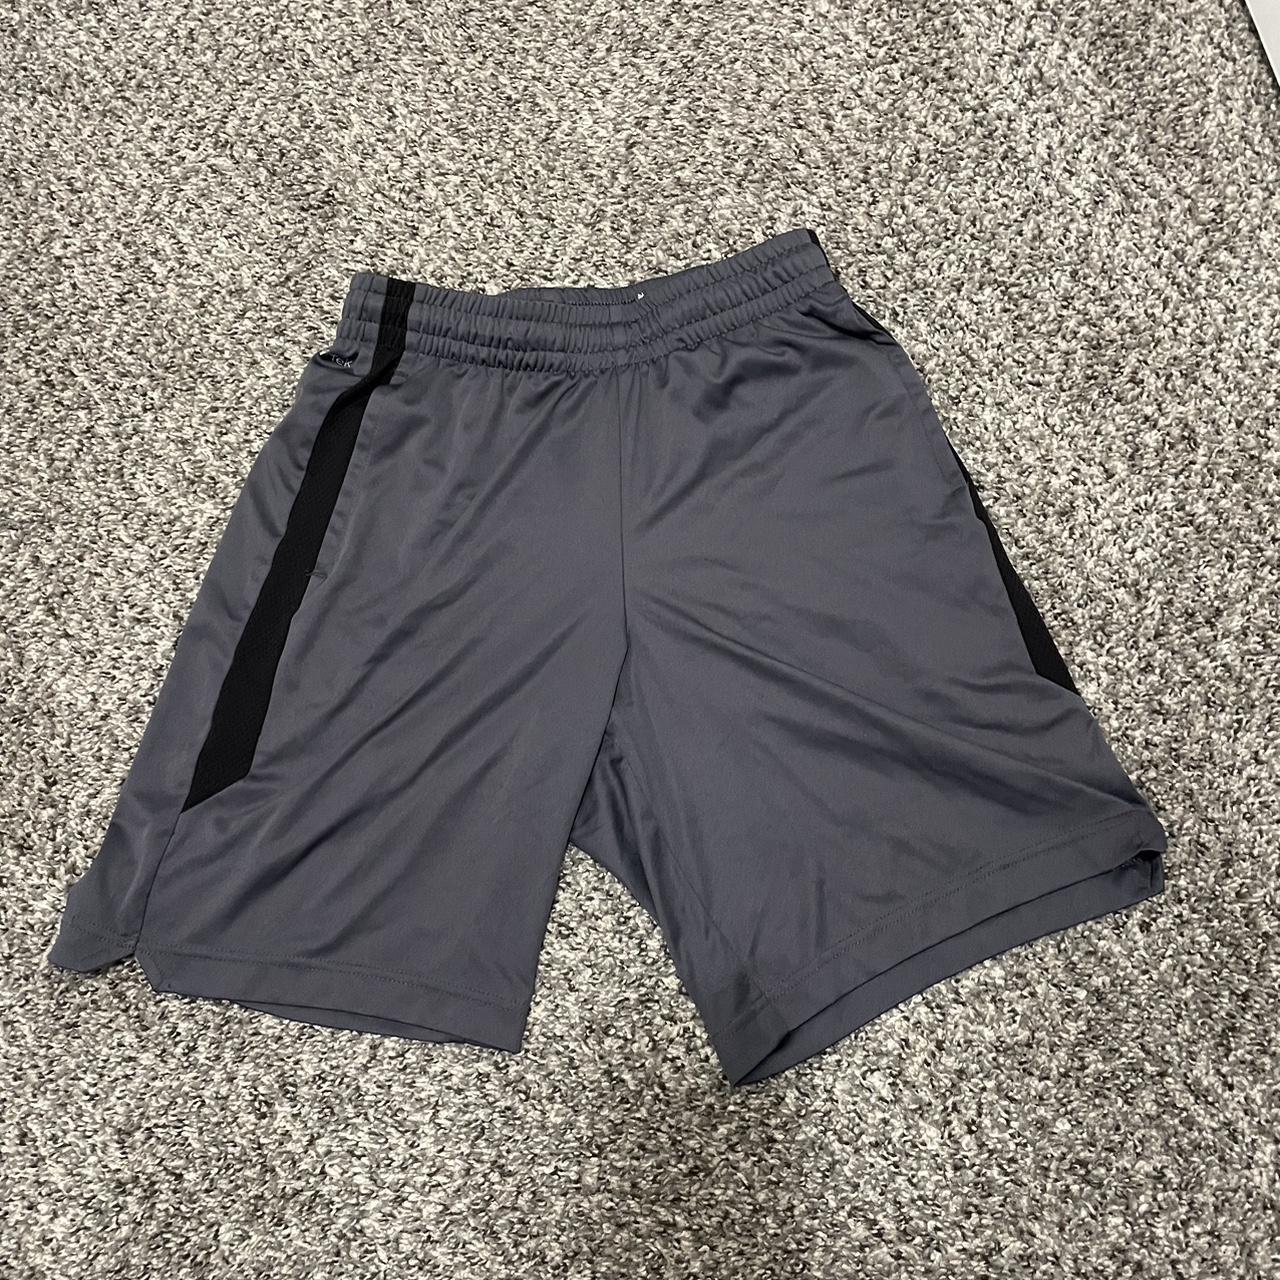 Athletic shorts Breathable✓ Size-Small #shorts - Depop